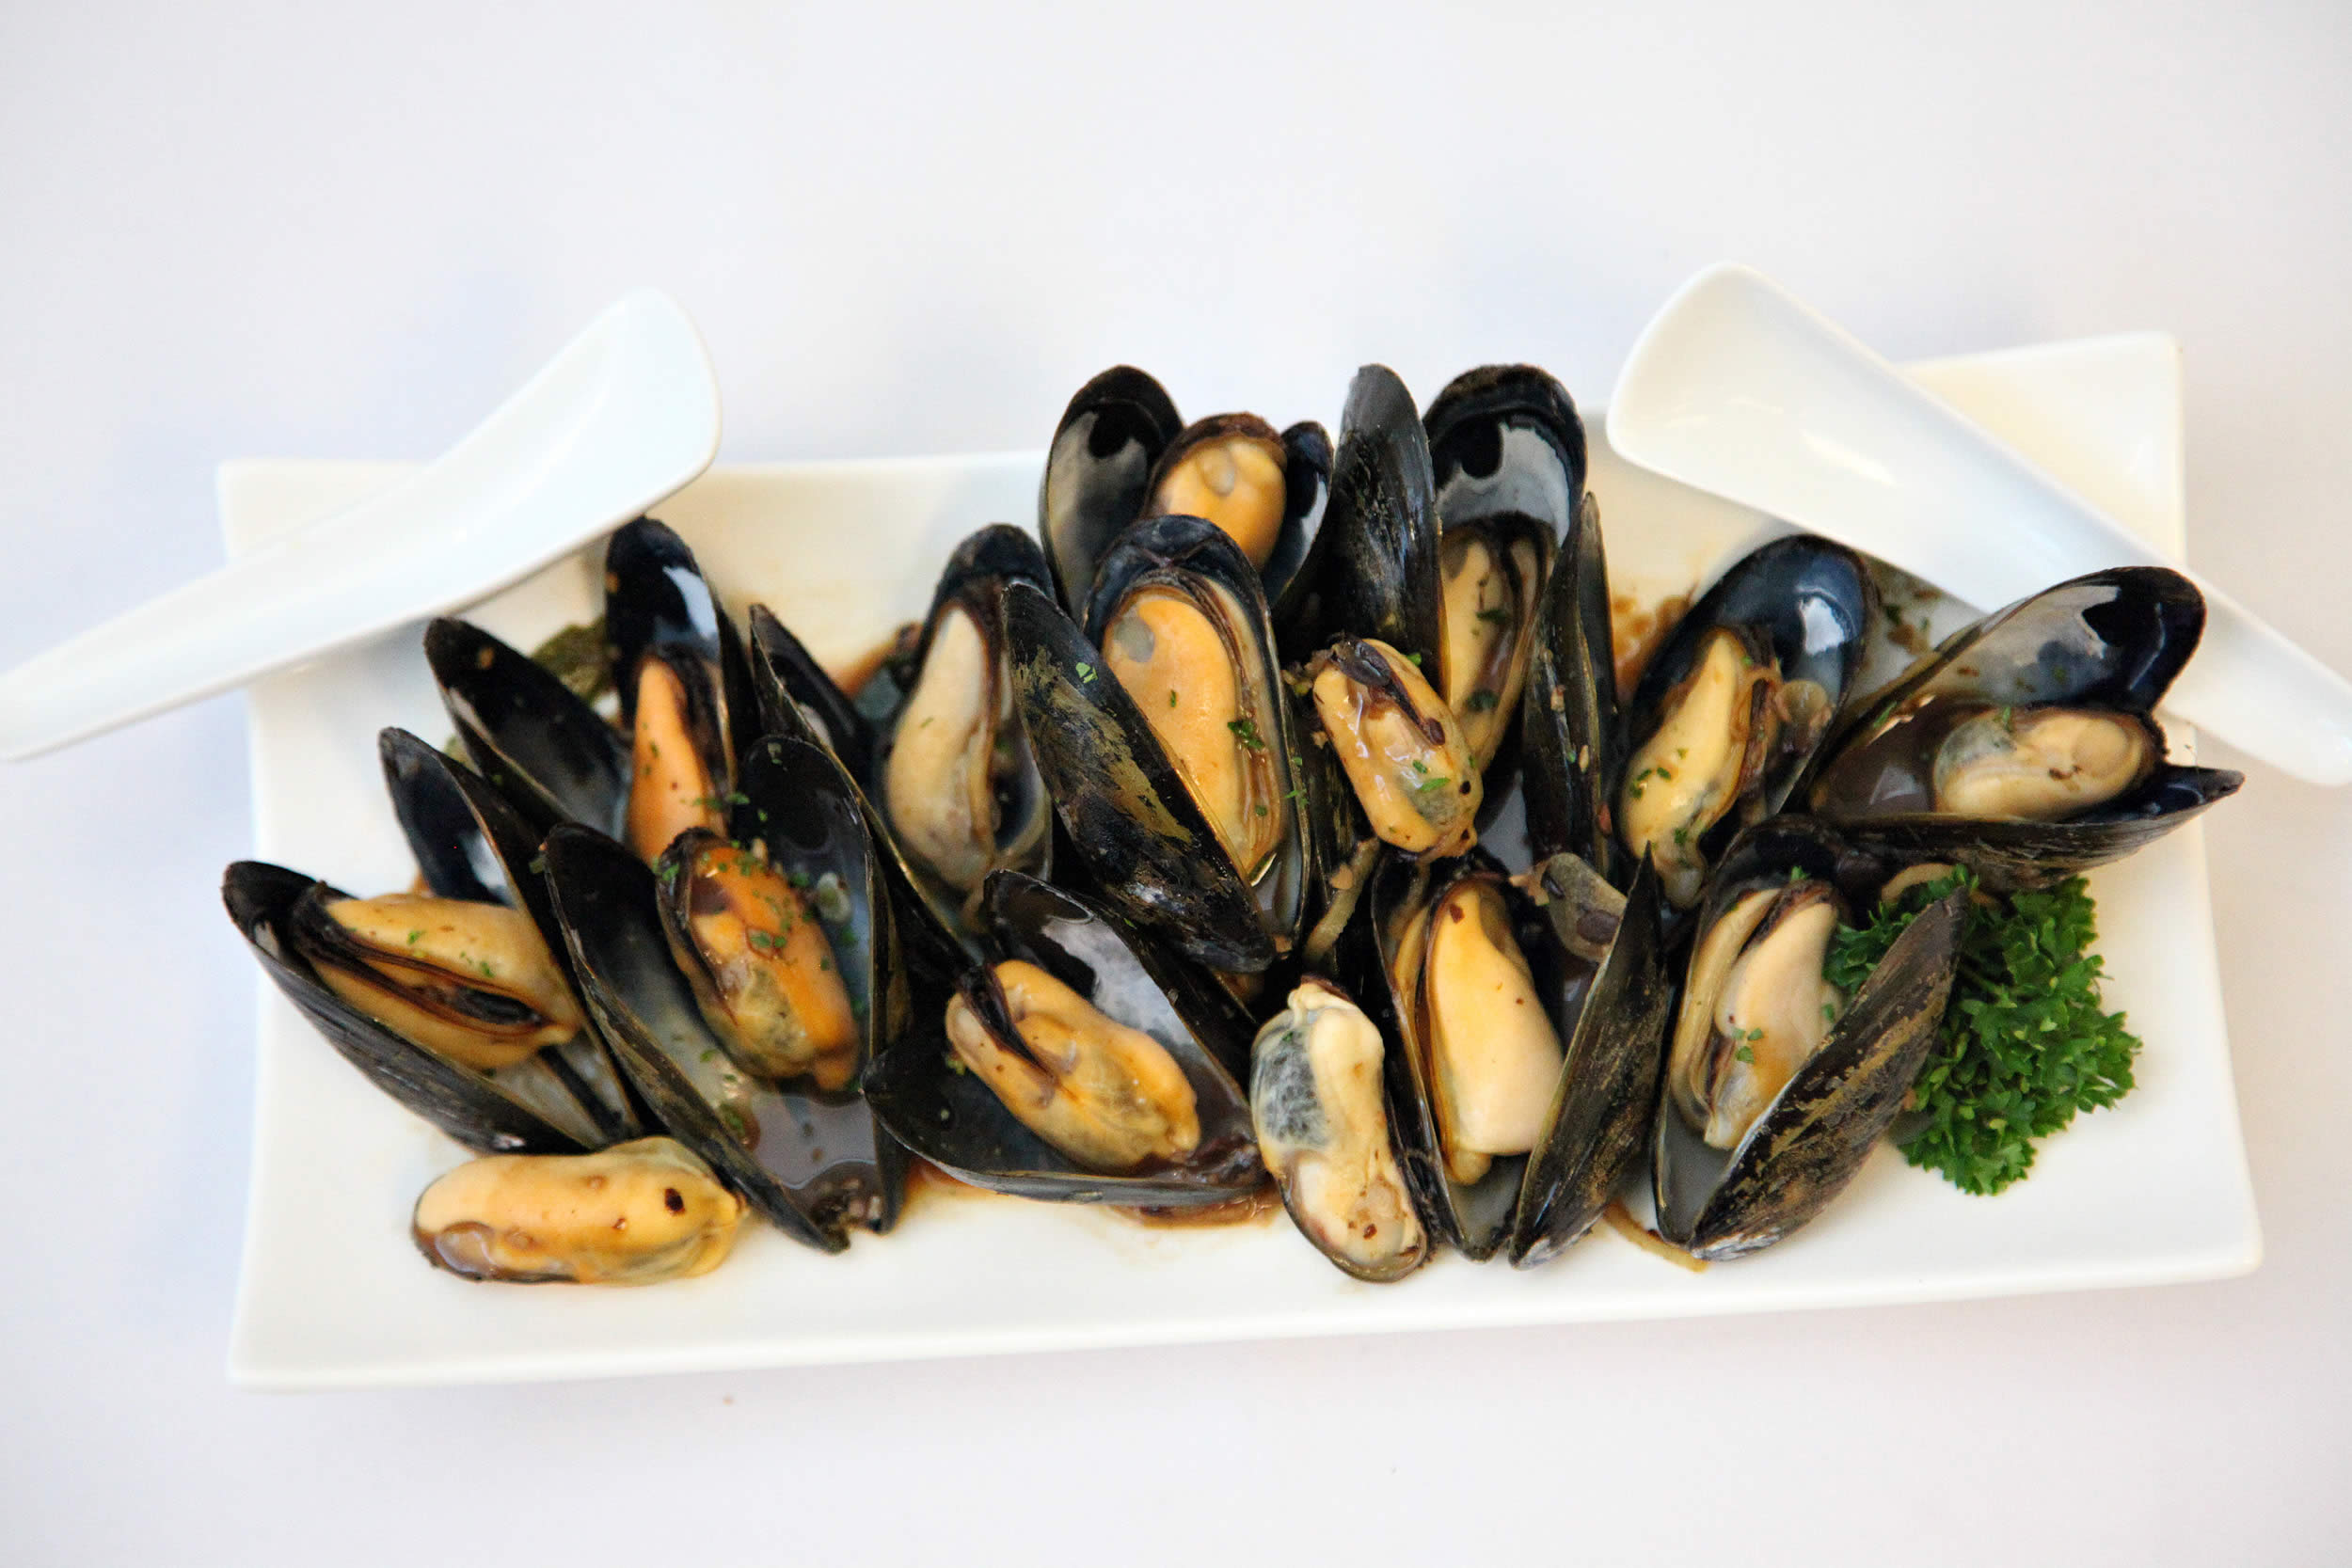 Chinese Black Bean Mussels - PEI Mussels - Mussel Recipes